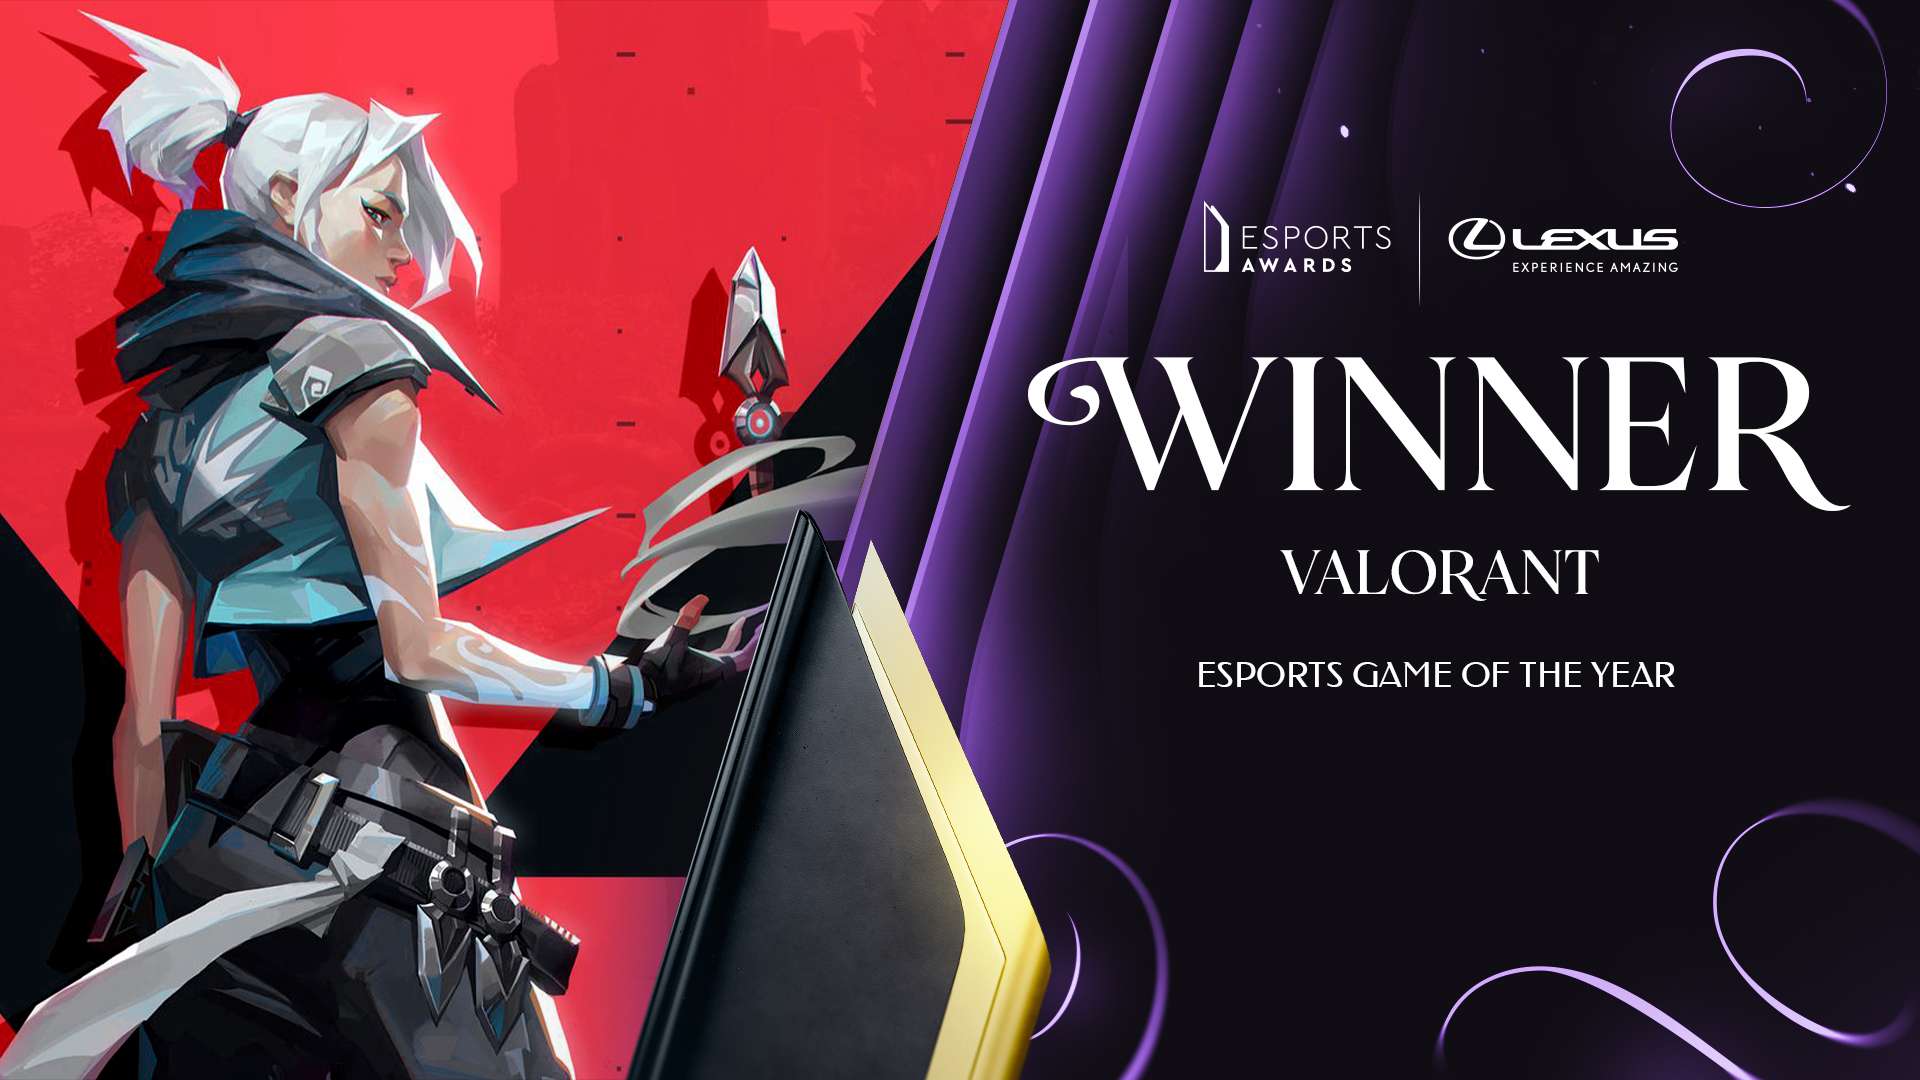 Esports Game of the Year thuộc về VALORANT.